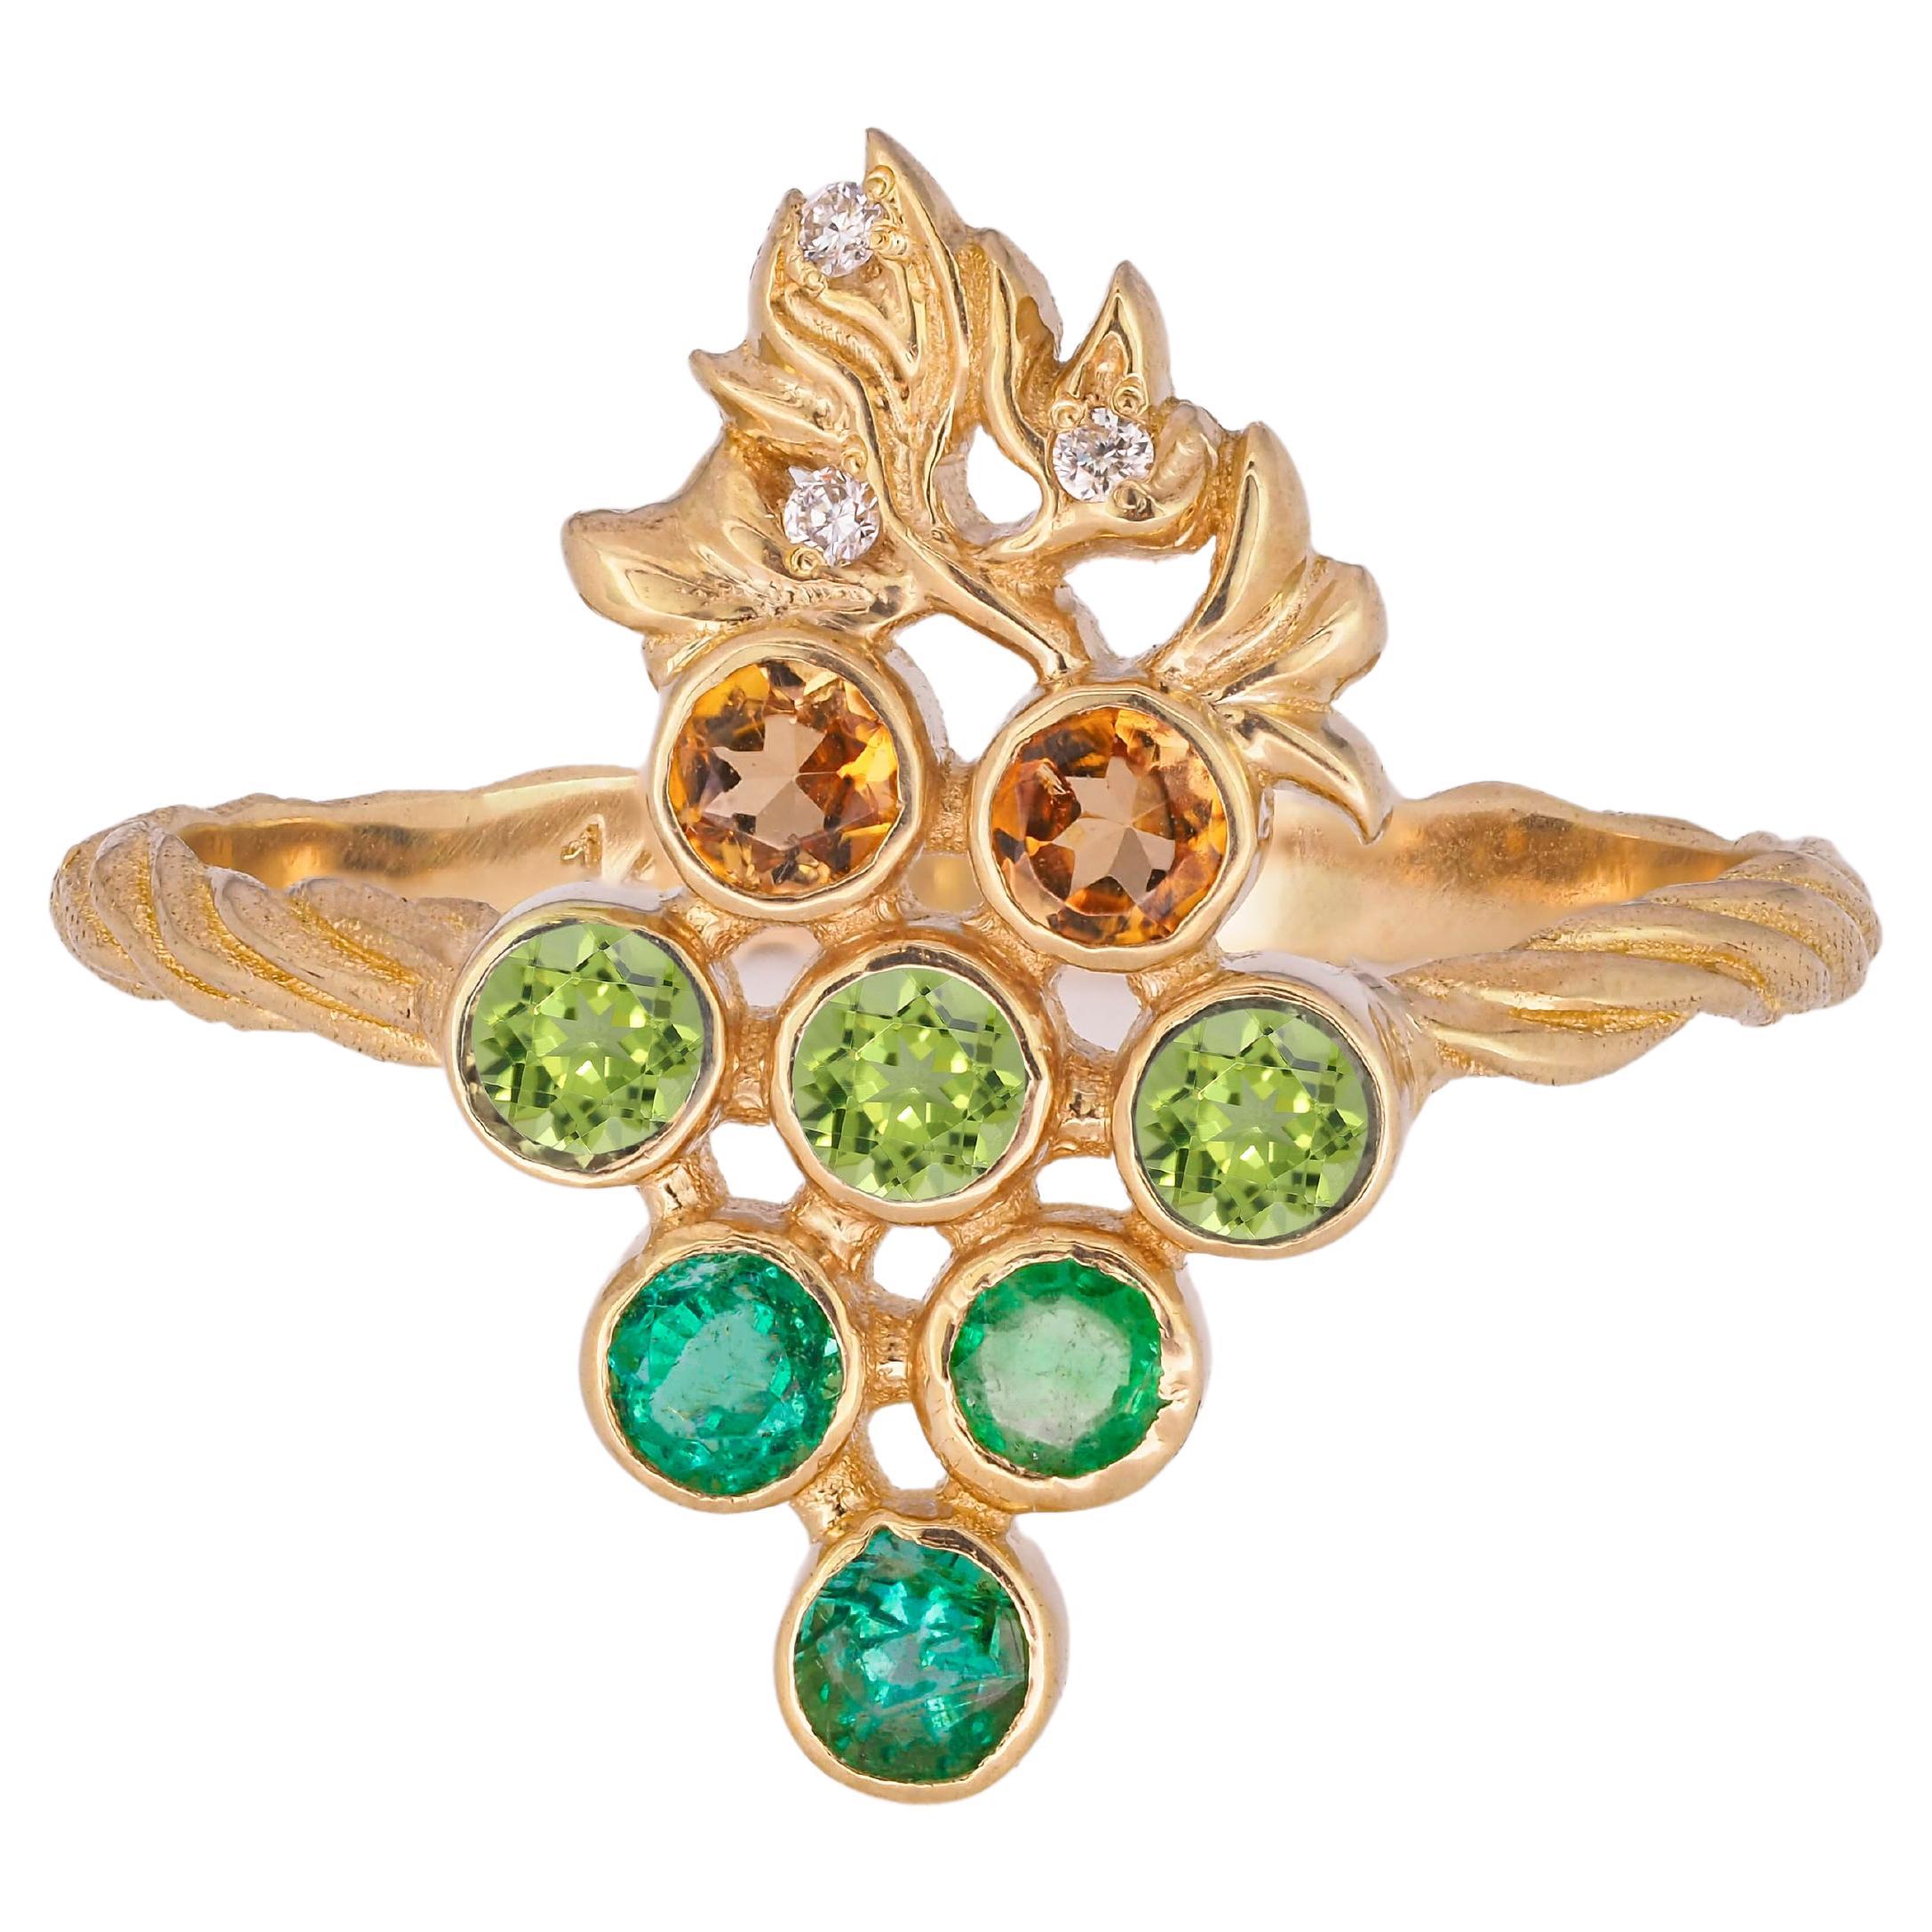 For Sale:  14k Gold Ring with Tourmalines, Emeralds and Diamonds, Grape Ring